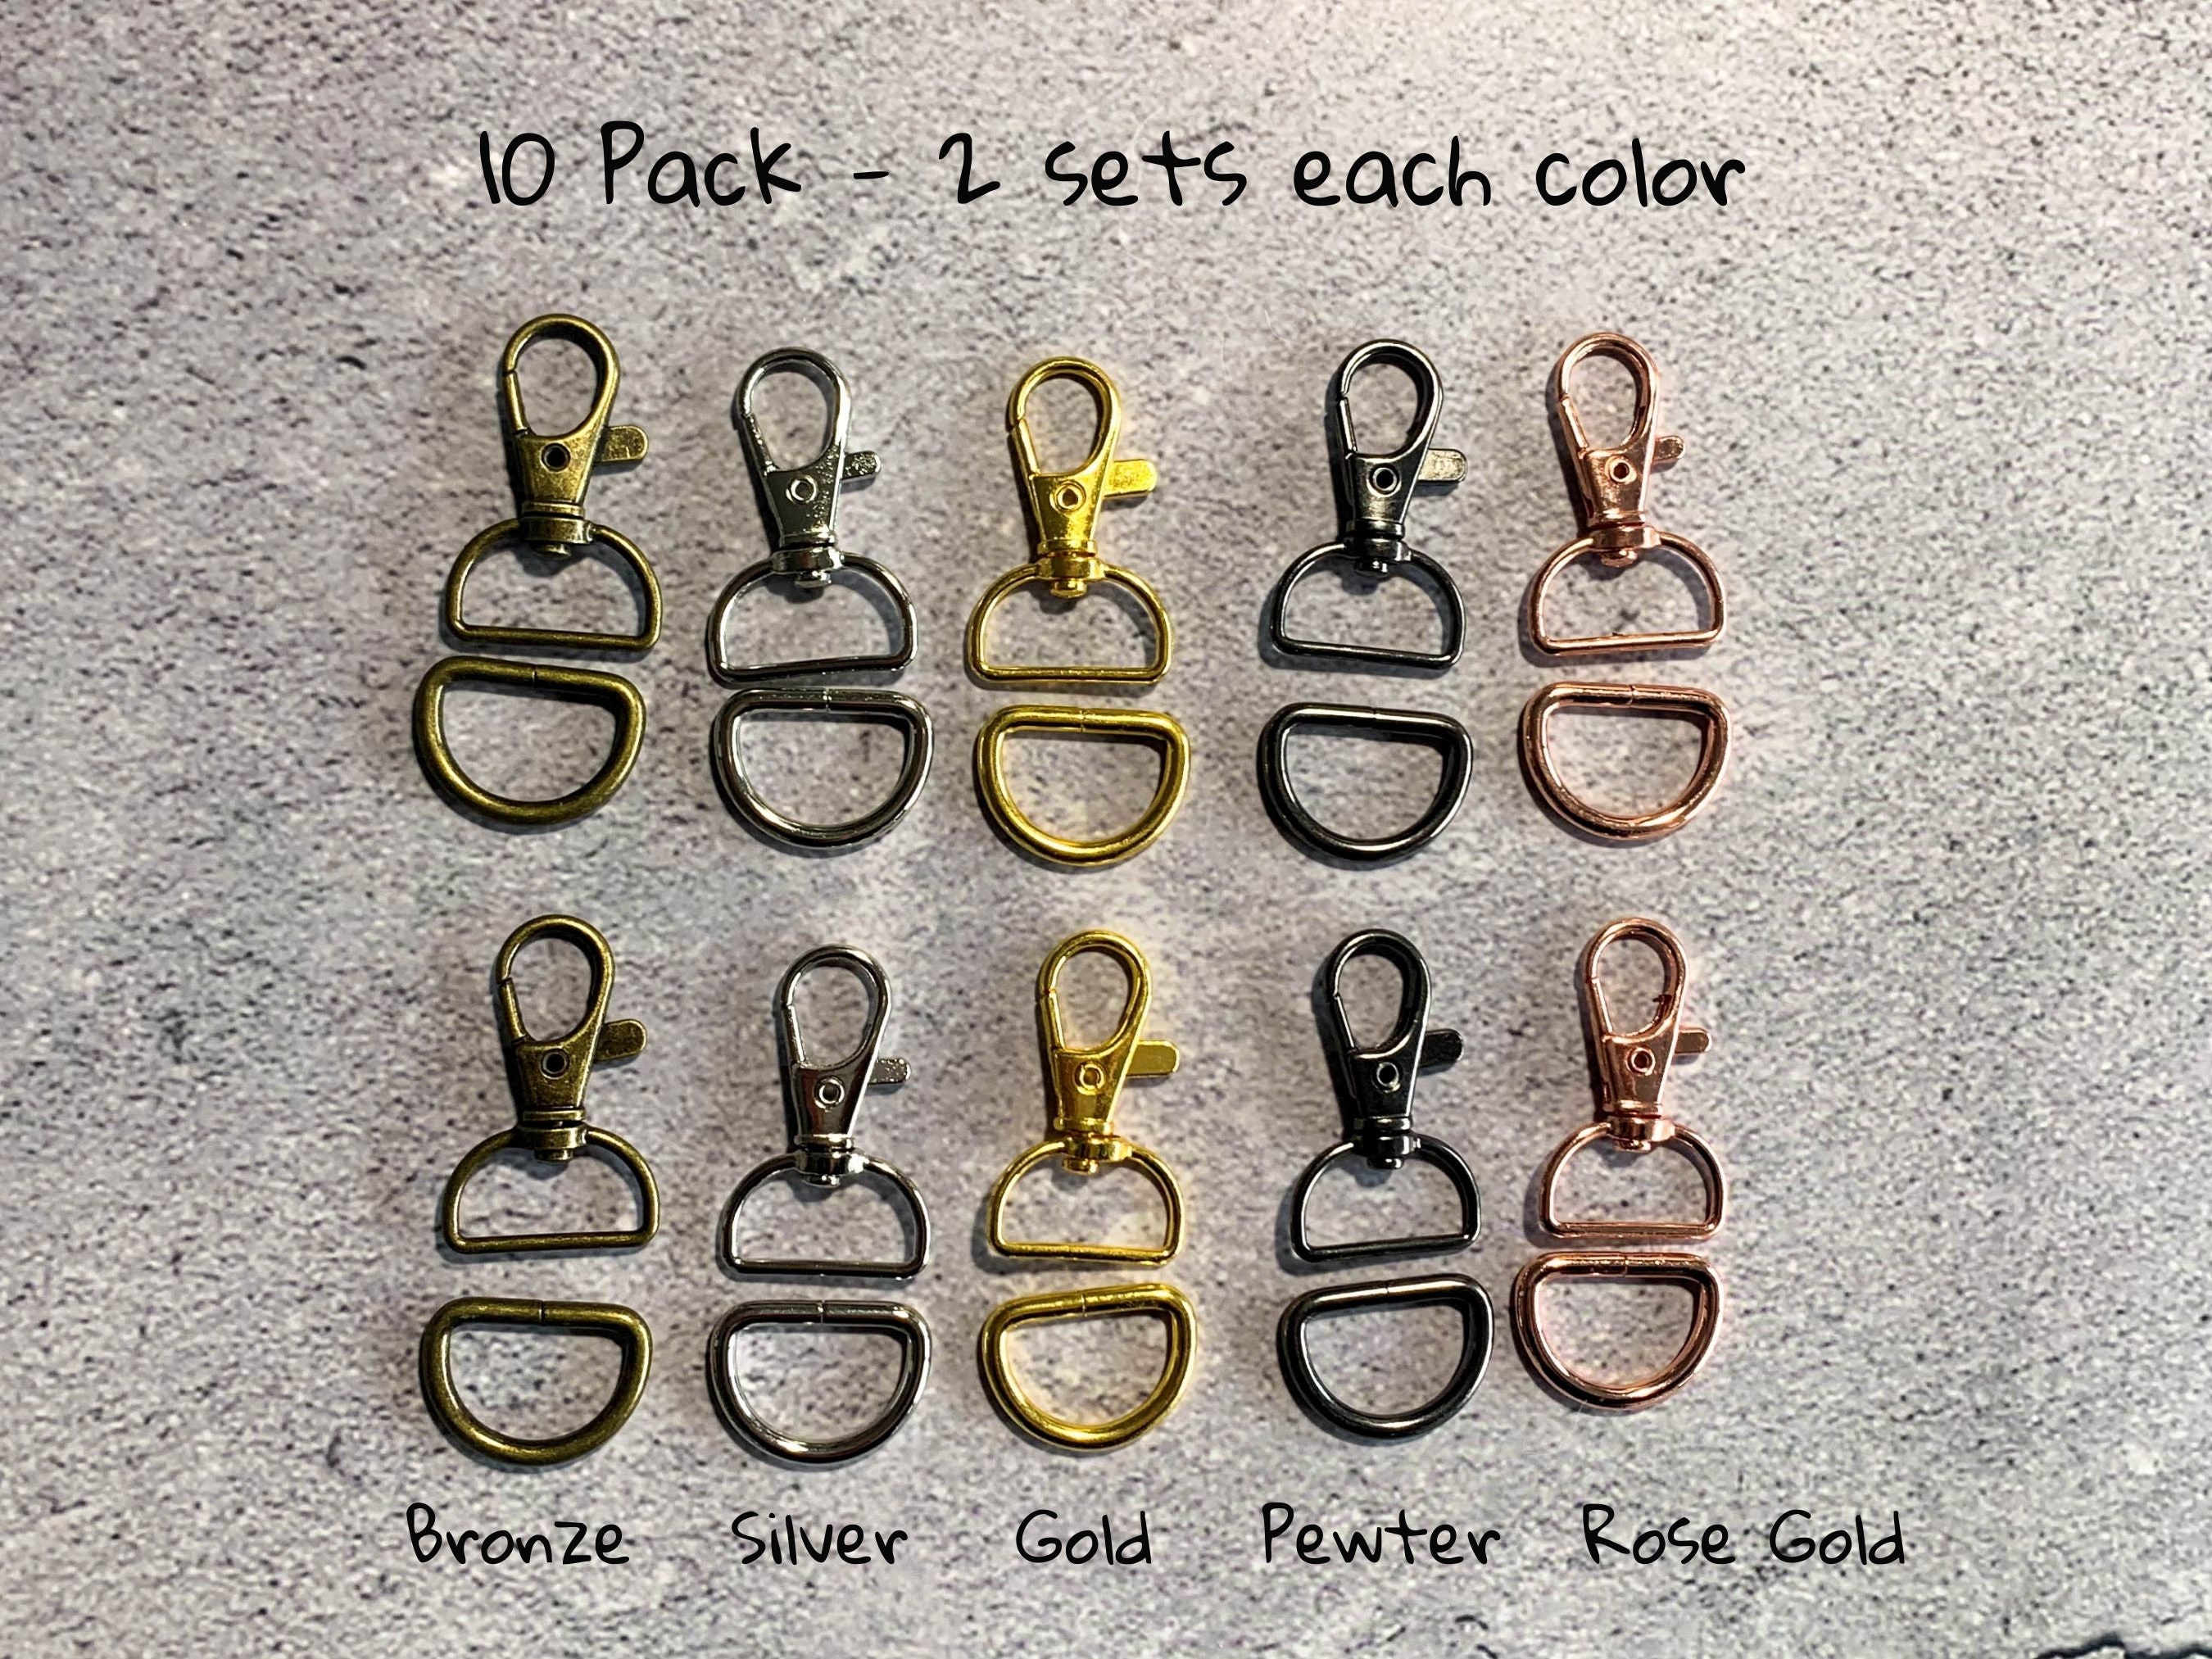 Purse Strap Hardware, Swivel Snap Clasp and D Ring 2 Piece Set, Fits 20mm  or 3/4 Inch Handbag Strap, 5 Metal Colors, Shipped From Canada 